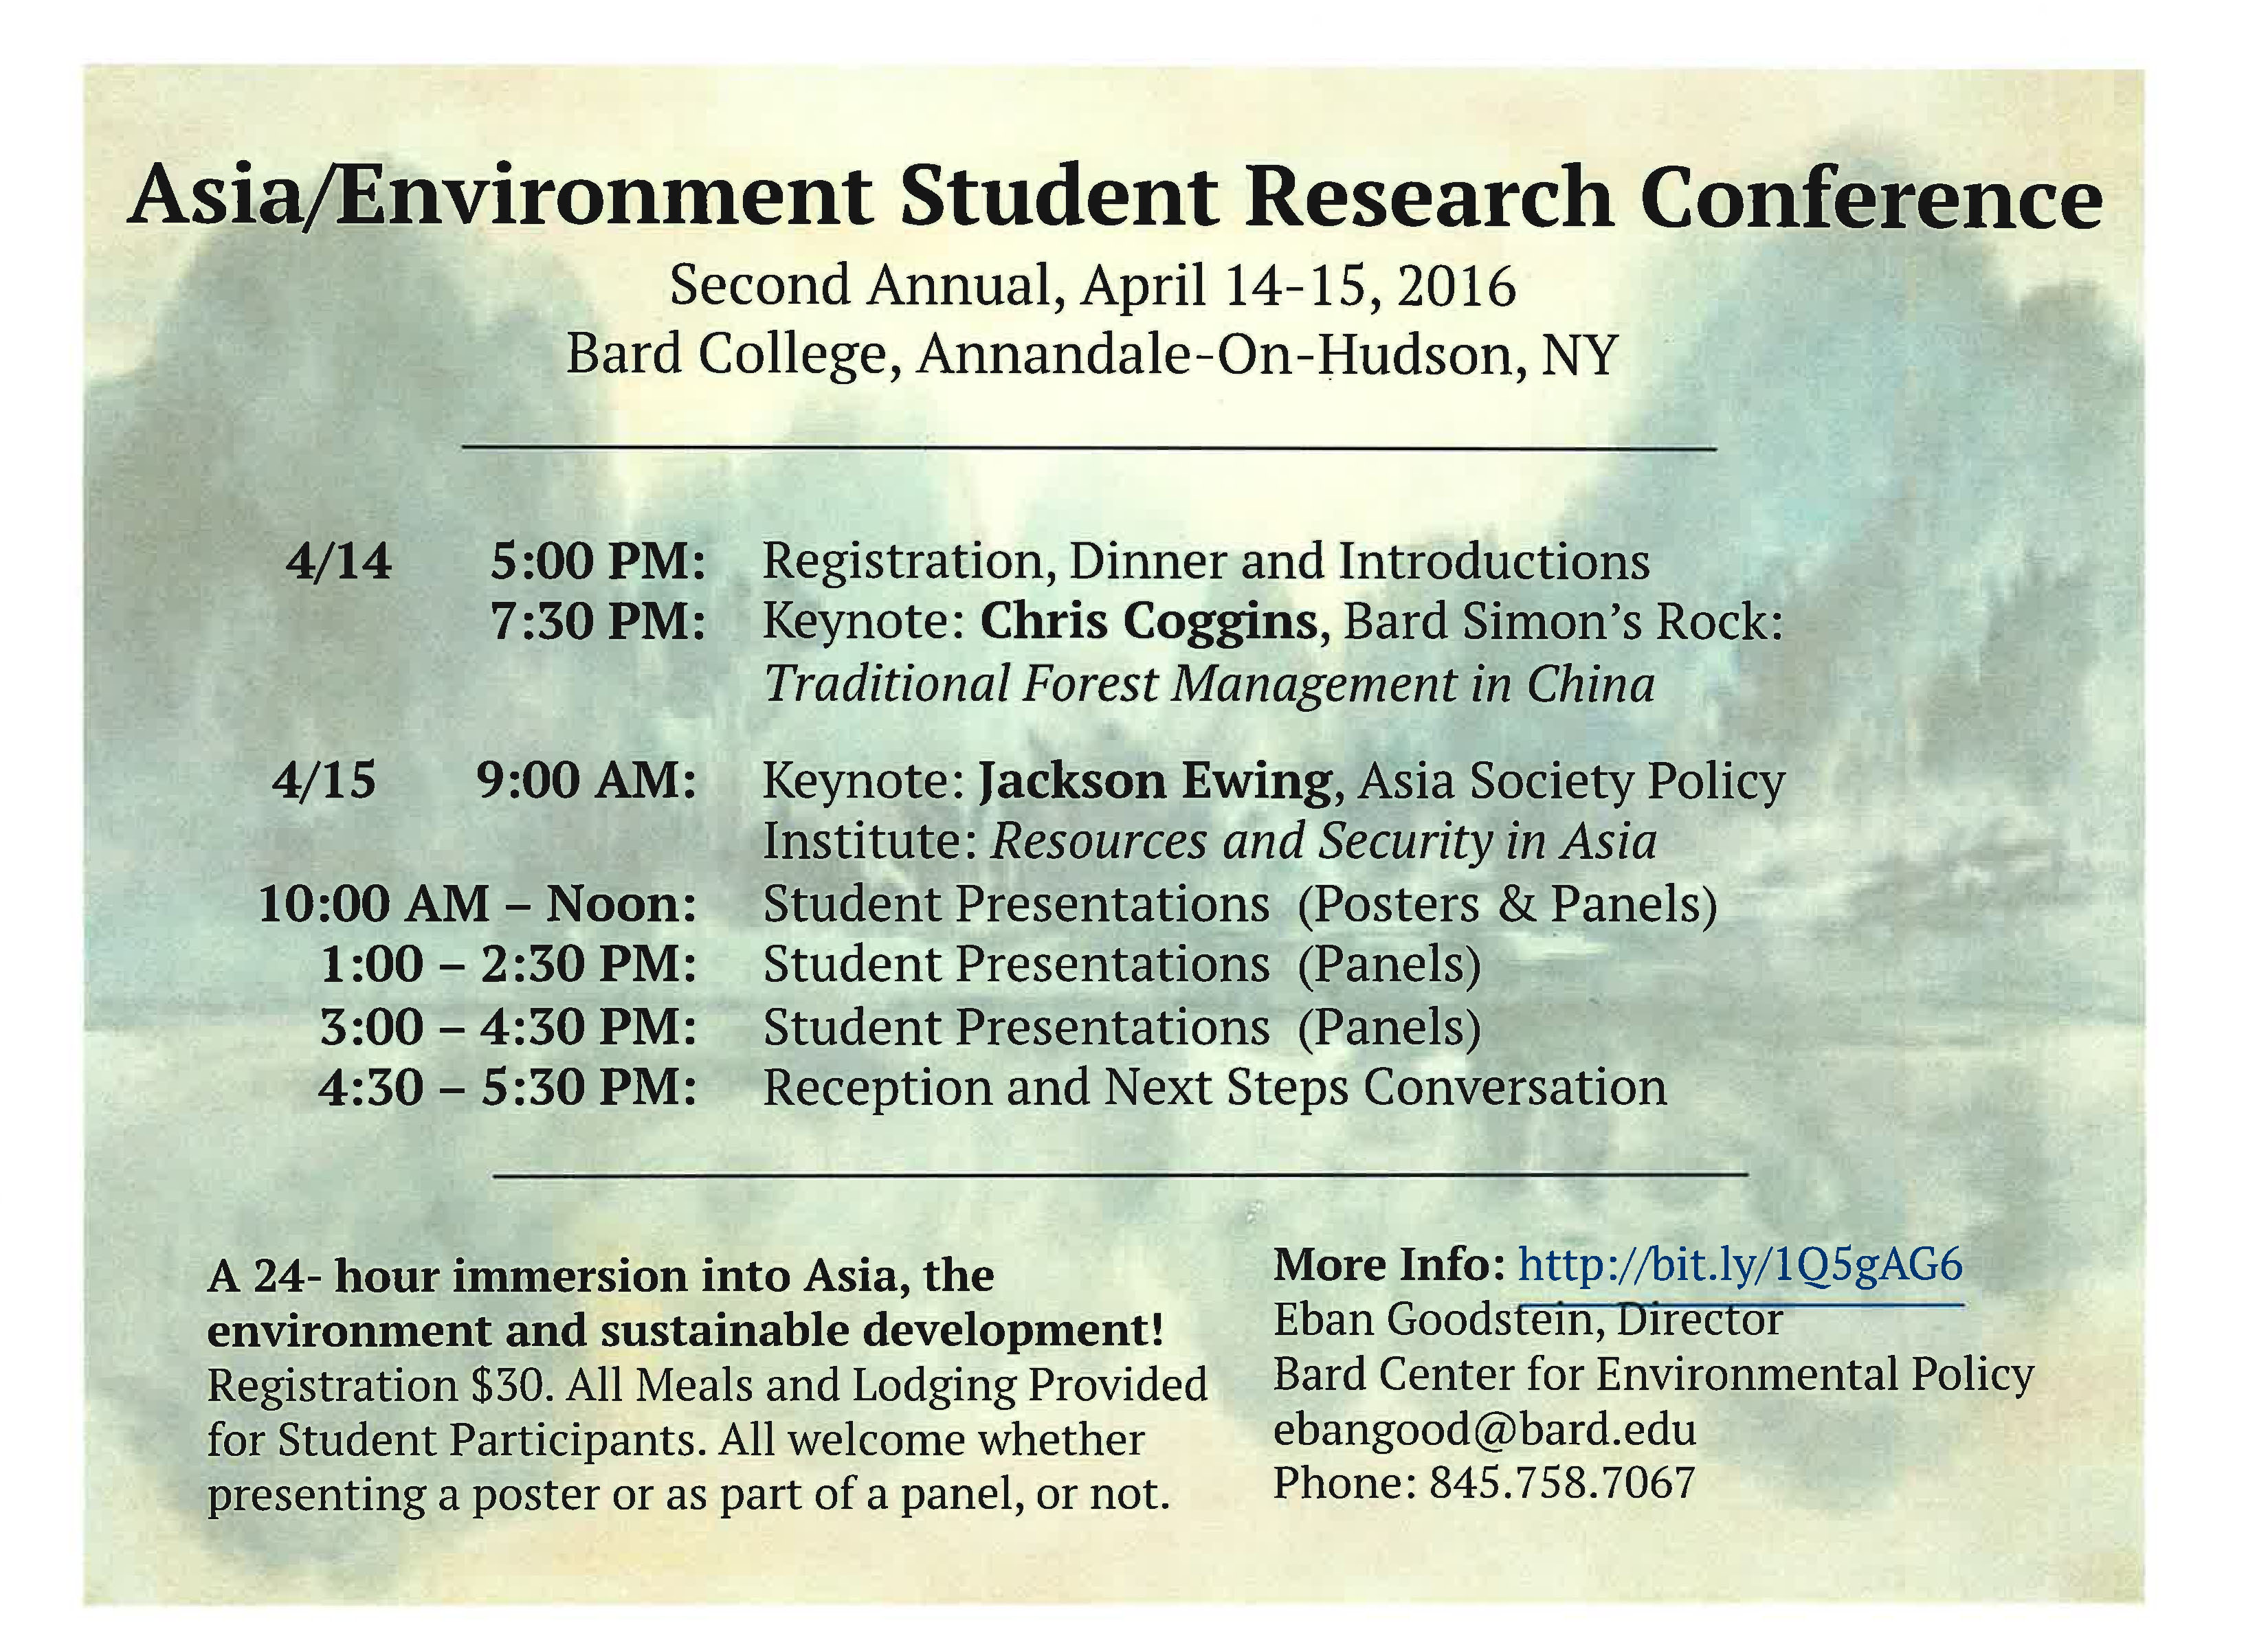 Second Annual Student Research Conference on Asia and the Environment